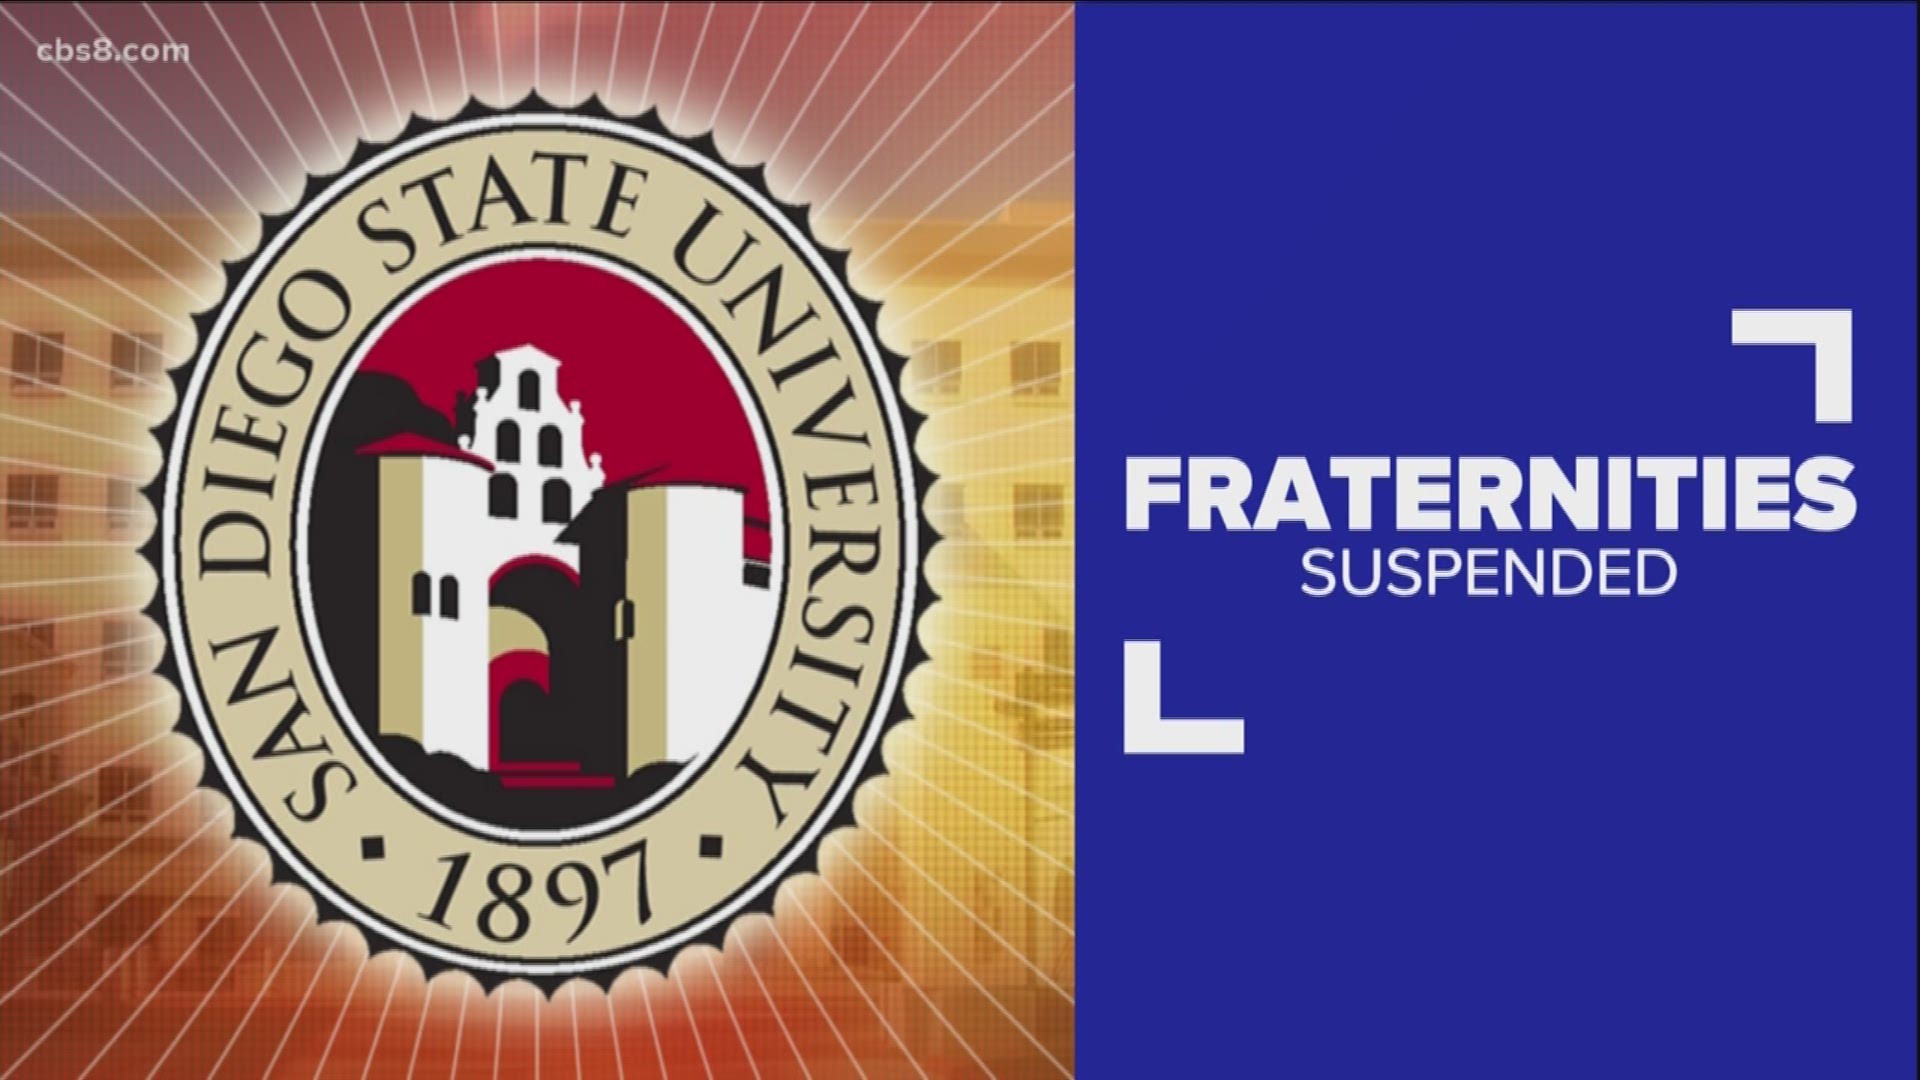 San Diego State University suspends 14 fraternities after a student was hospitalized after attending an event.